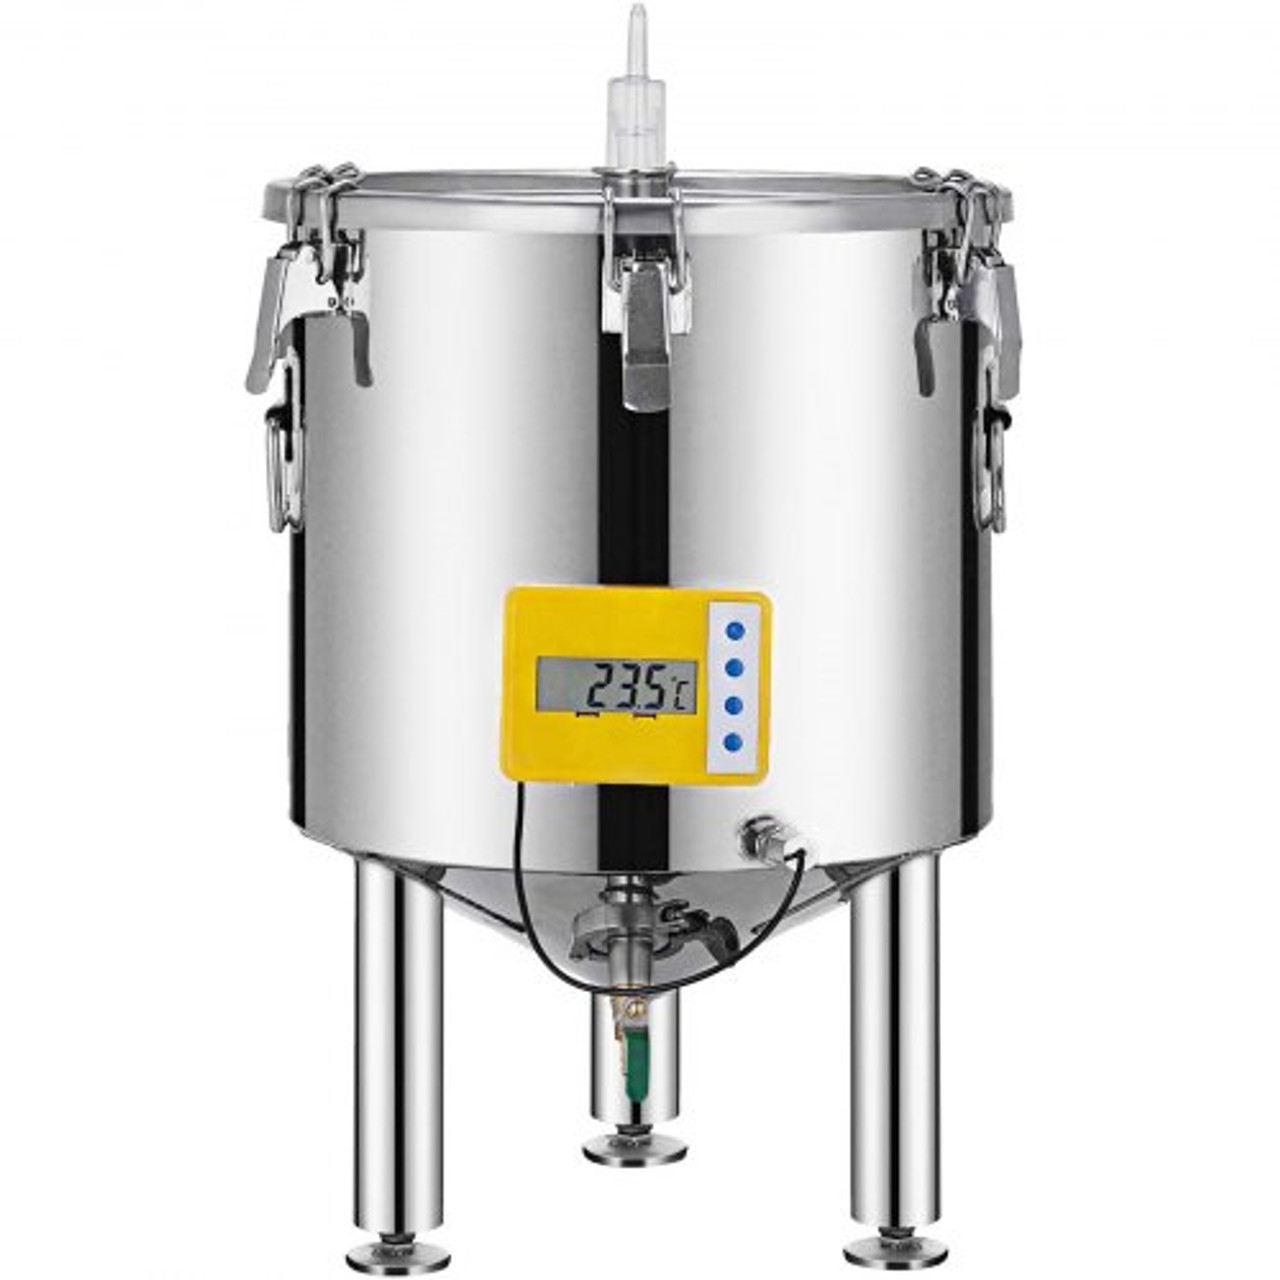 14 Gallon Stainless Steel Brew Fermenter Home Brewing Brew Bucket Fermenter With conical base Brewing Equipment